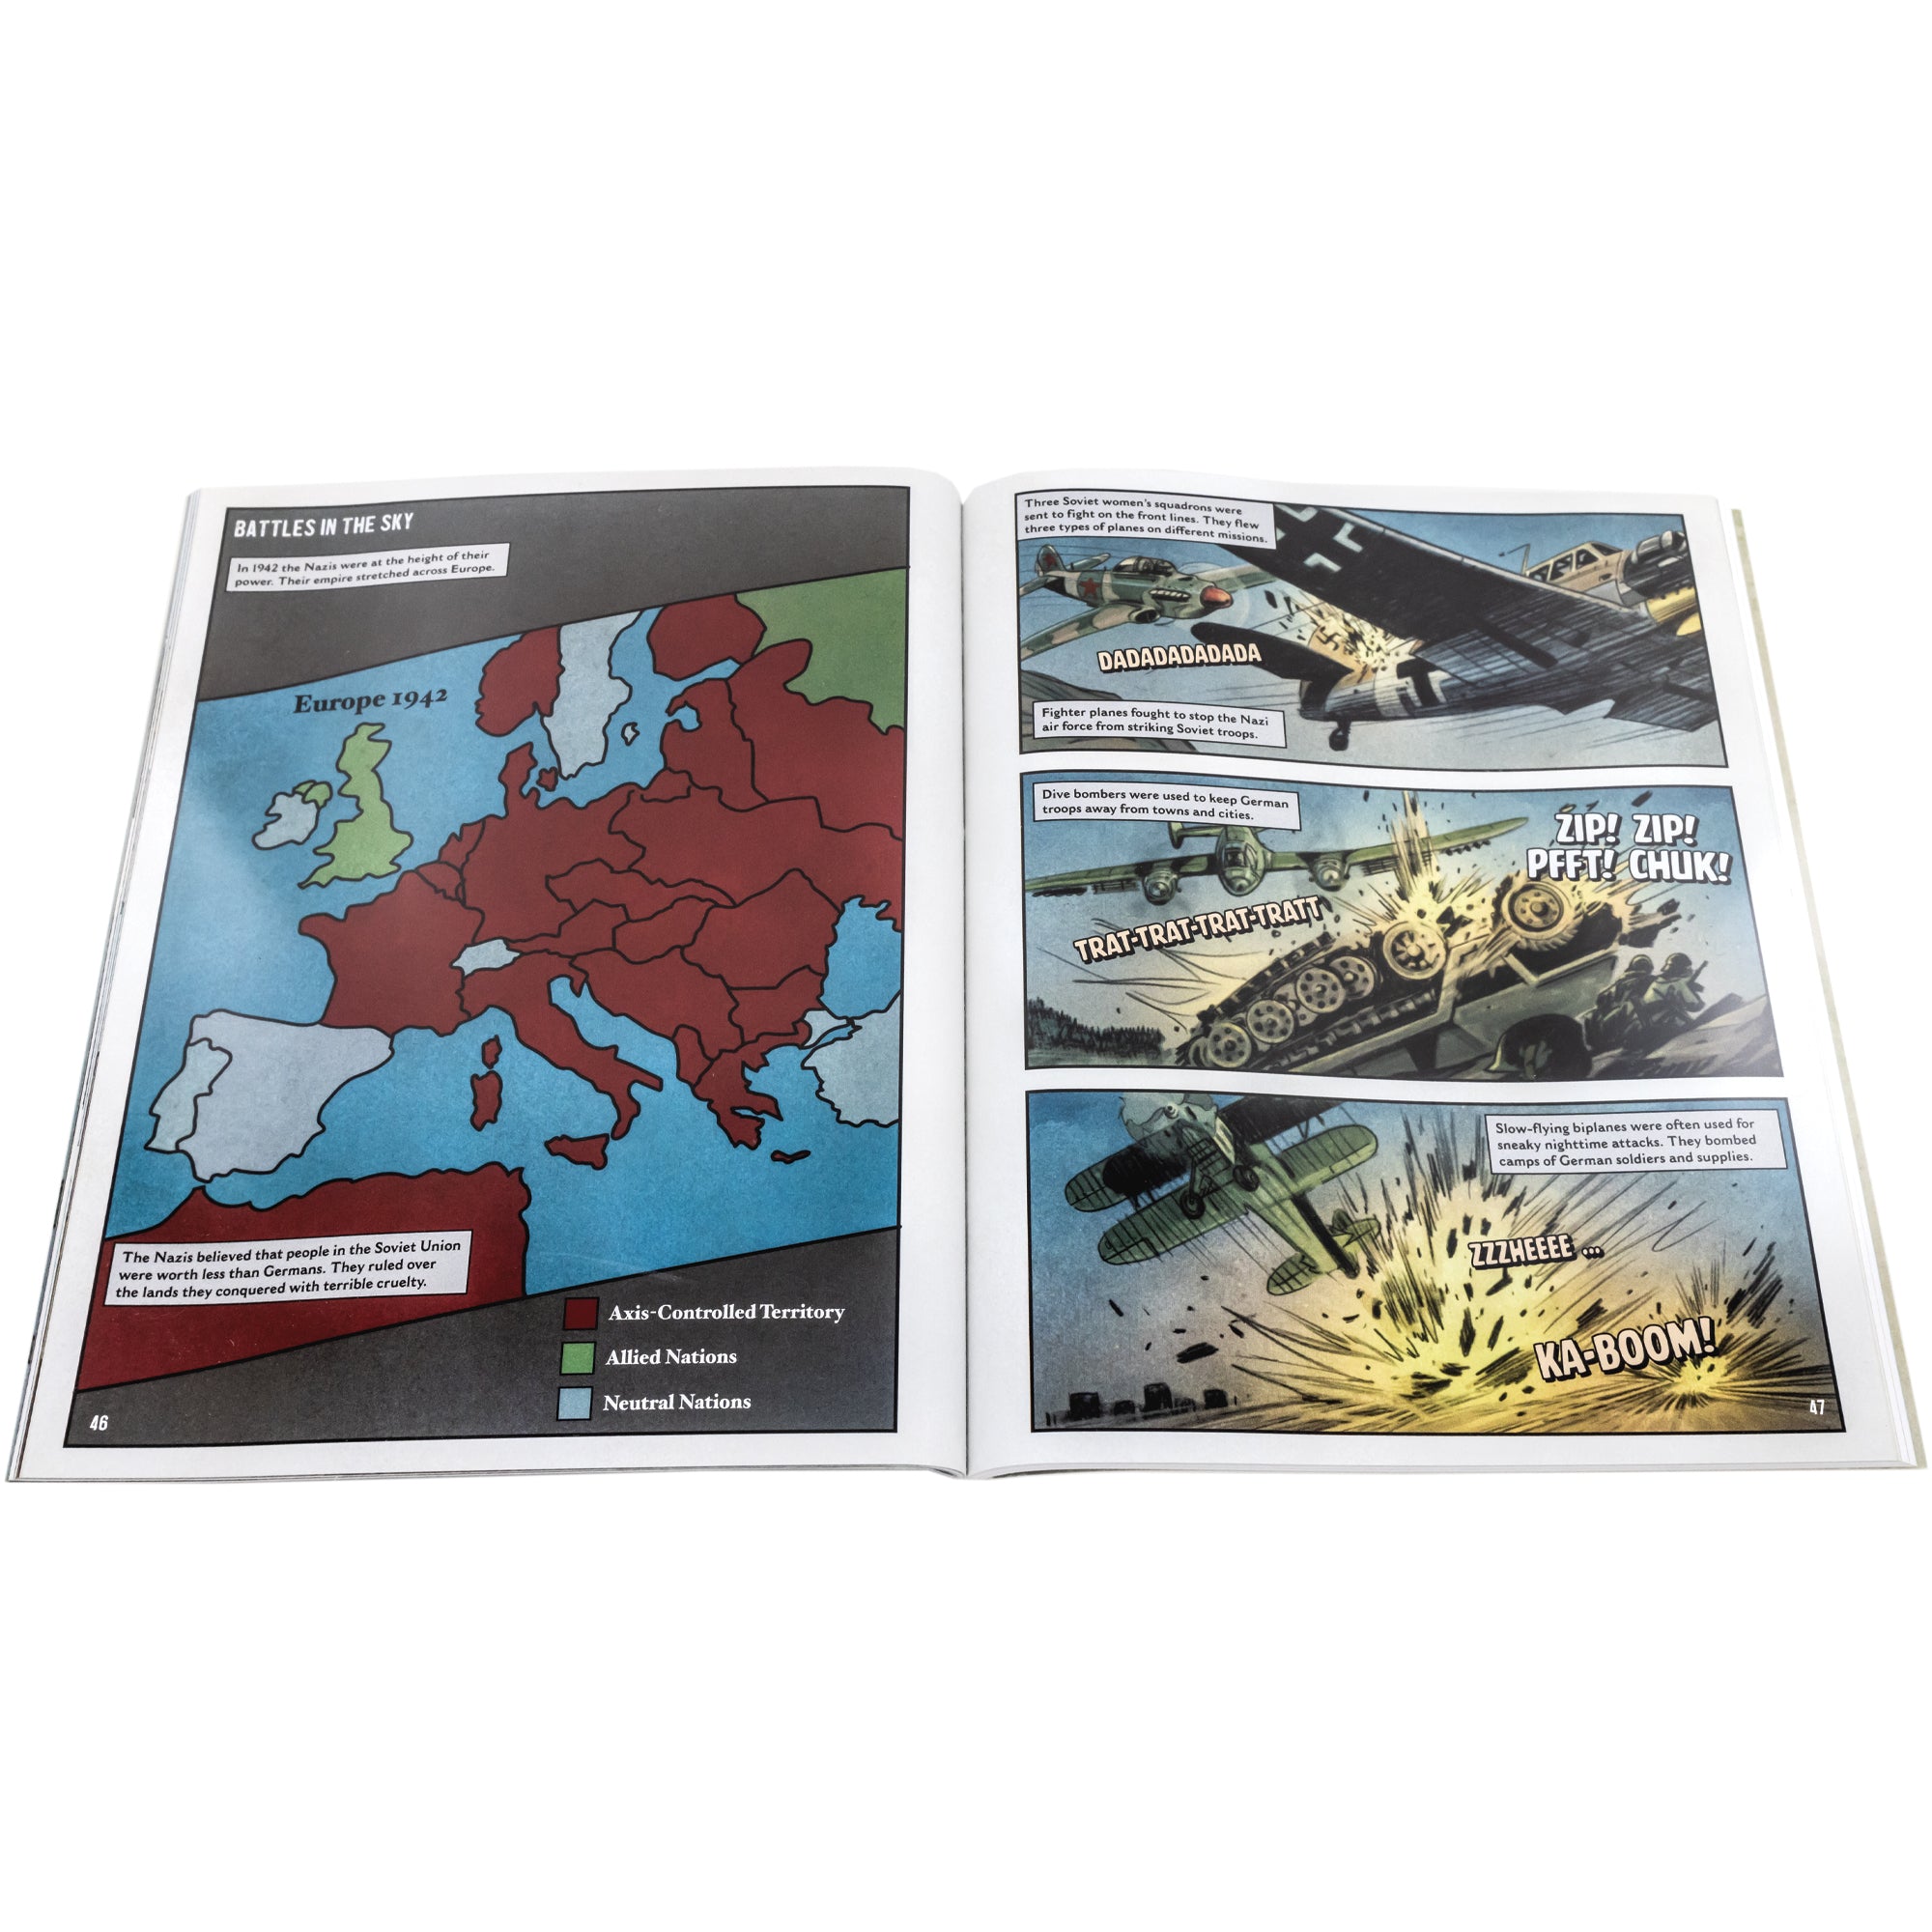 Amazing World War 2 Stories book open to show inside pages. The left page shows a 1942 map of Europe, colored maroon for Axis-Controlled Territories, green for Allied Nations, and light blue for Neutral Nations. The right page shows 3 types of planes and their uses. The Fighter Plane on top was used to stop the Nazi air force from attacking the Soviet troops. The Dive Bomber, in the middle, kept German troops away from towns and cities. The Biplanes were used for night time attacks on German camps.